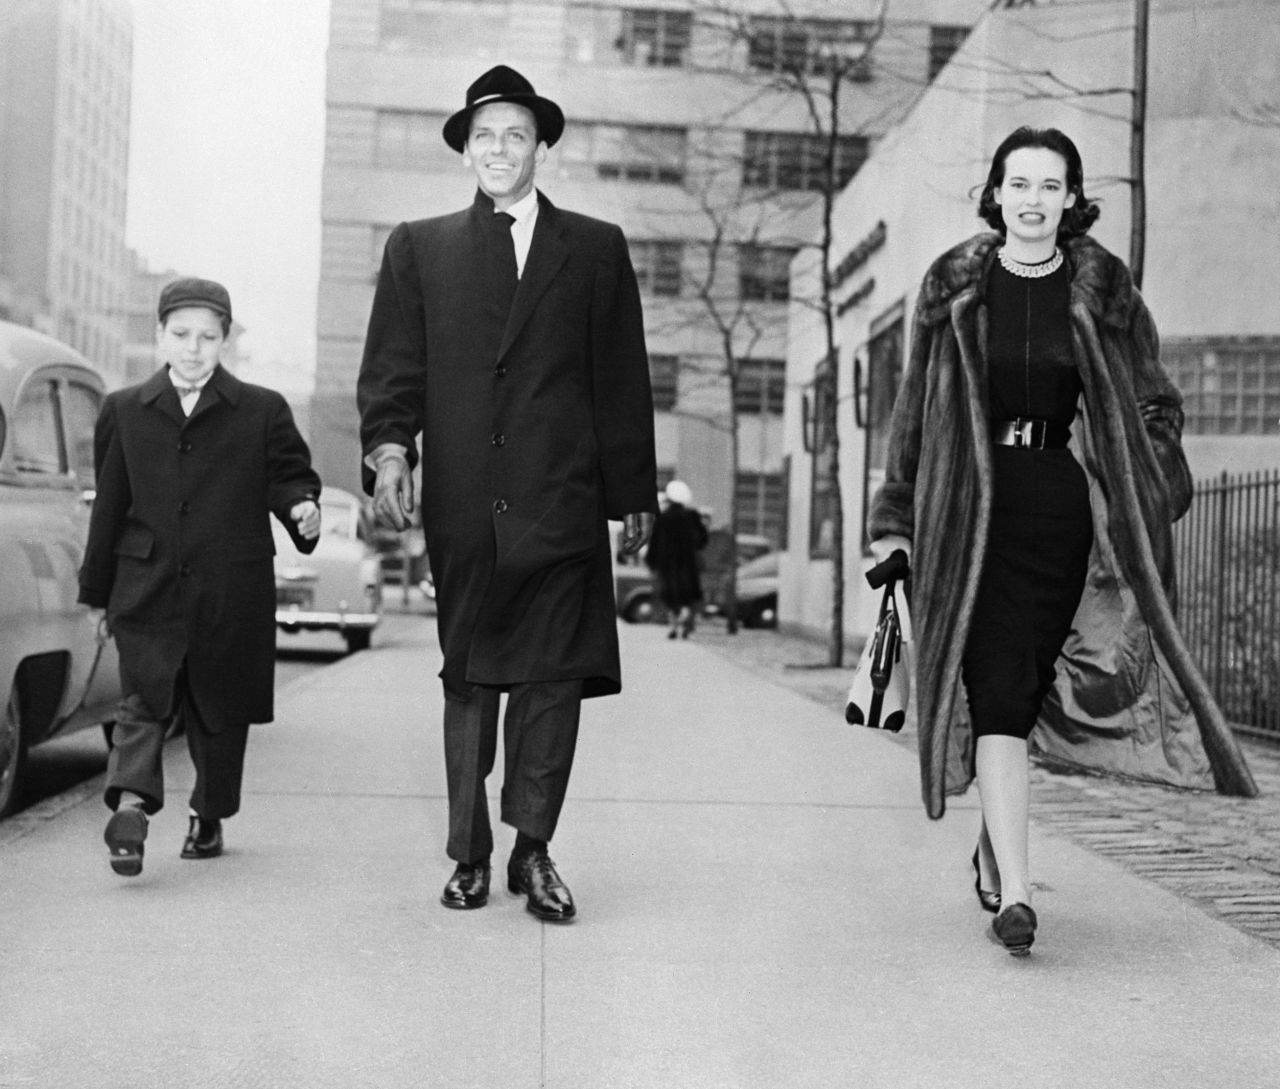 Vanderbilt strolls with Frank Sinatra and Frank Sinatra Jr. The previous night, she had attended a New York stage premiere with Sinatra.